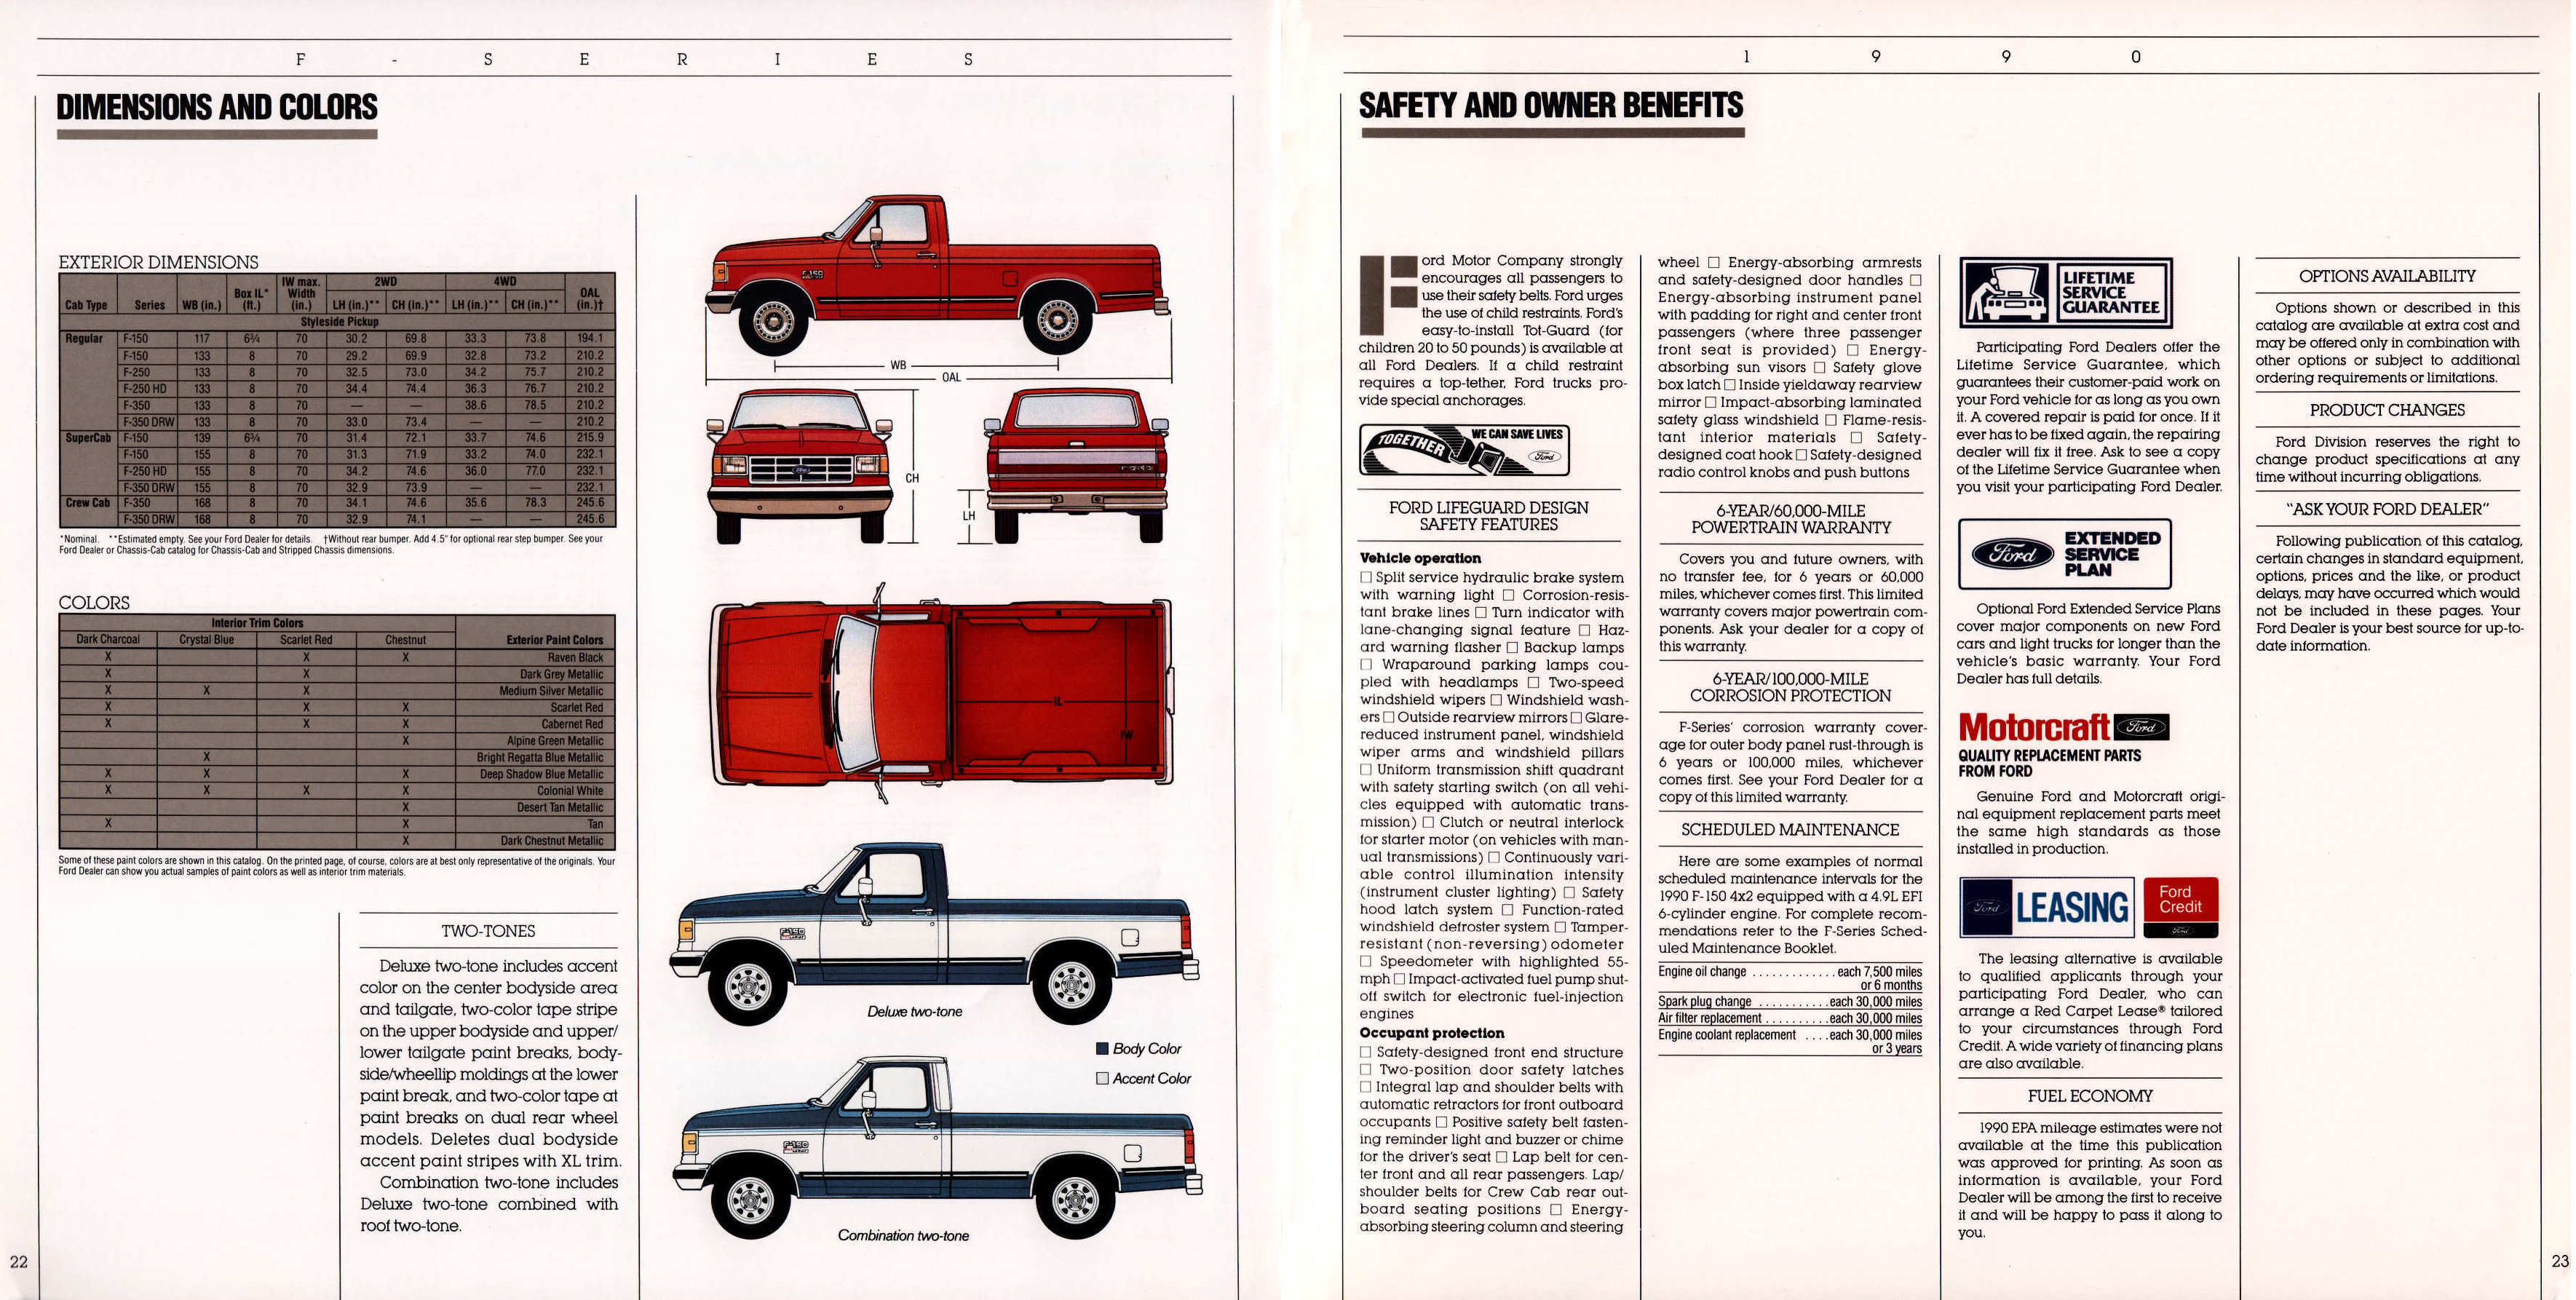 1990_Ford_F_Series-22-23